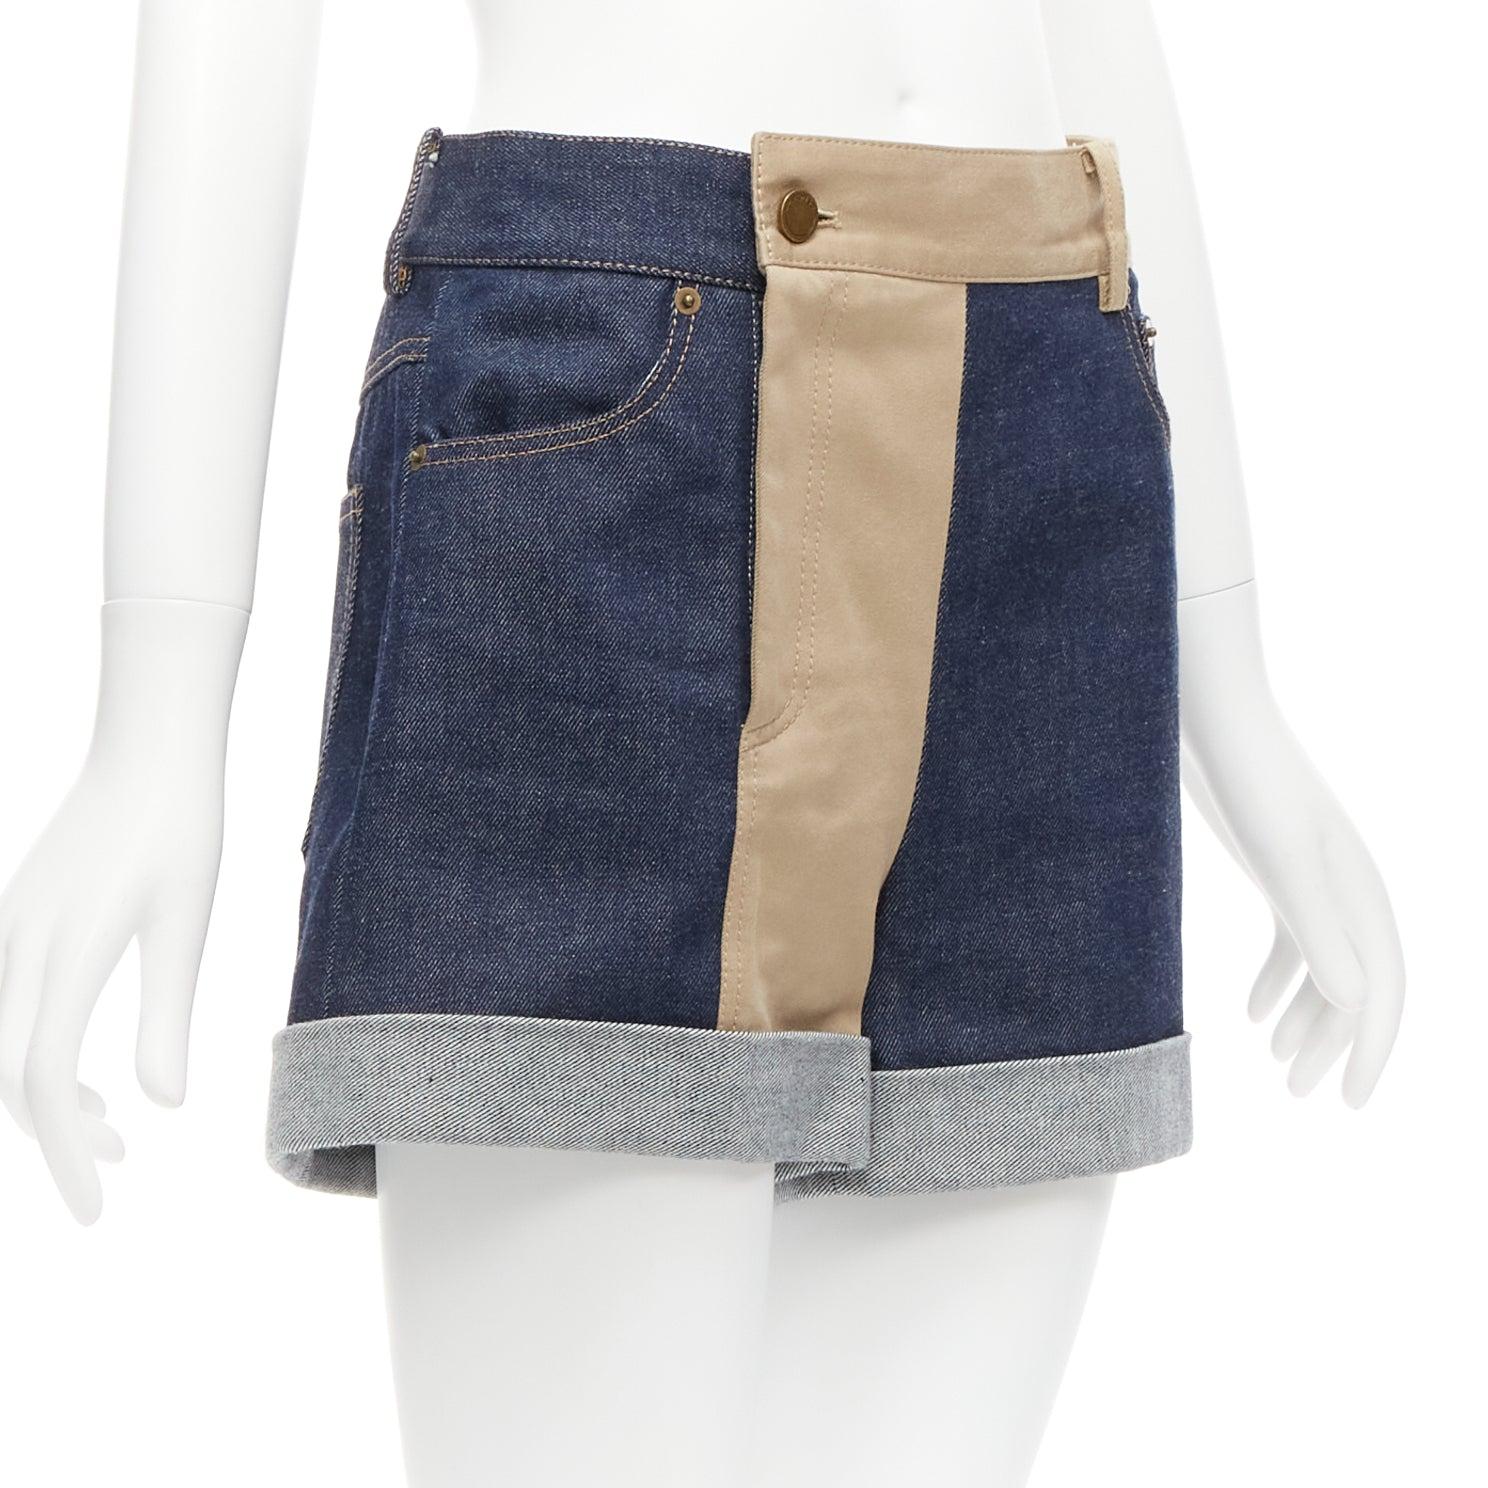 MONSE beige blue cotton denim deconstructed panelled cuffed shorts US2 S
Reference: NKLL/A00053
Brand: Monse
Material: Cotton
Color: Beige, Blue
Pattern: Solid
Closure: Zip Fly
Extra Details: Reconstructed patchwork in beige cotton and blue